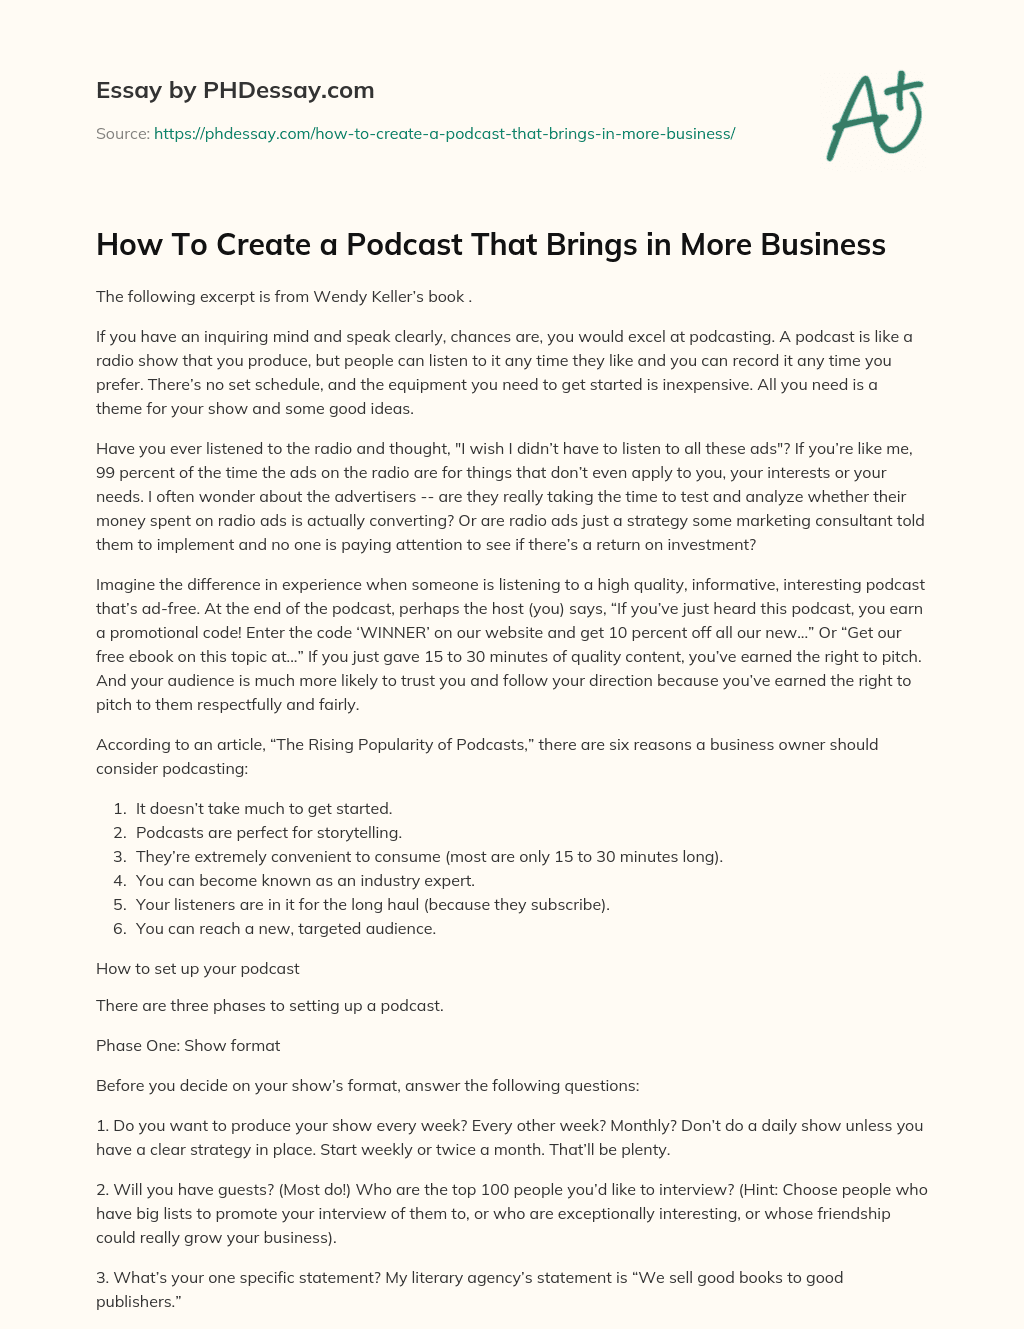 How To Create a Podcast That Brings in More Business essay